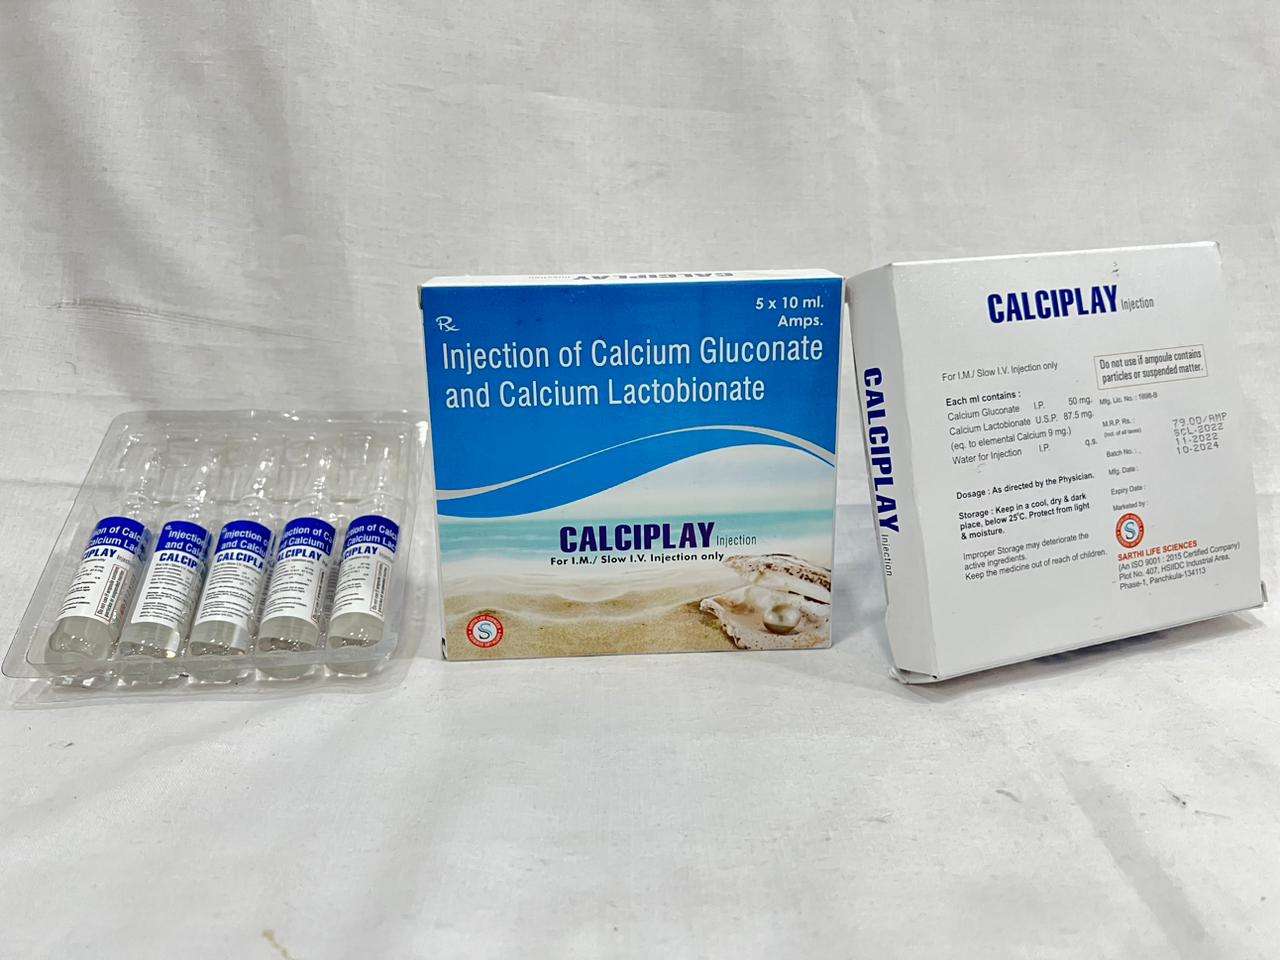 calcium gluconate 50mg. + calcium lactobionate u.s.p  87.5mg+ water for
injection i.p